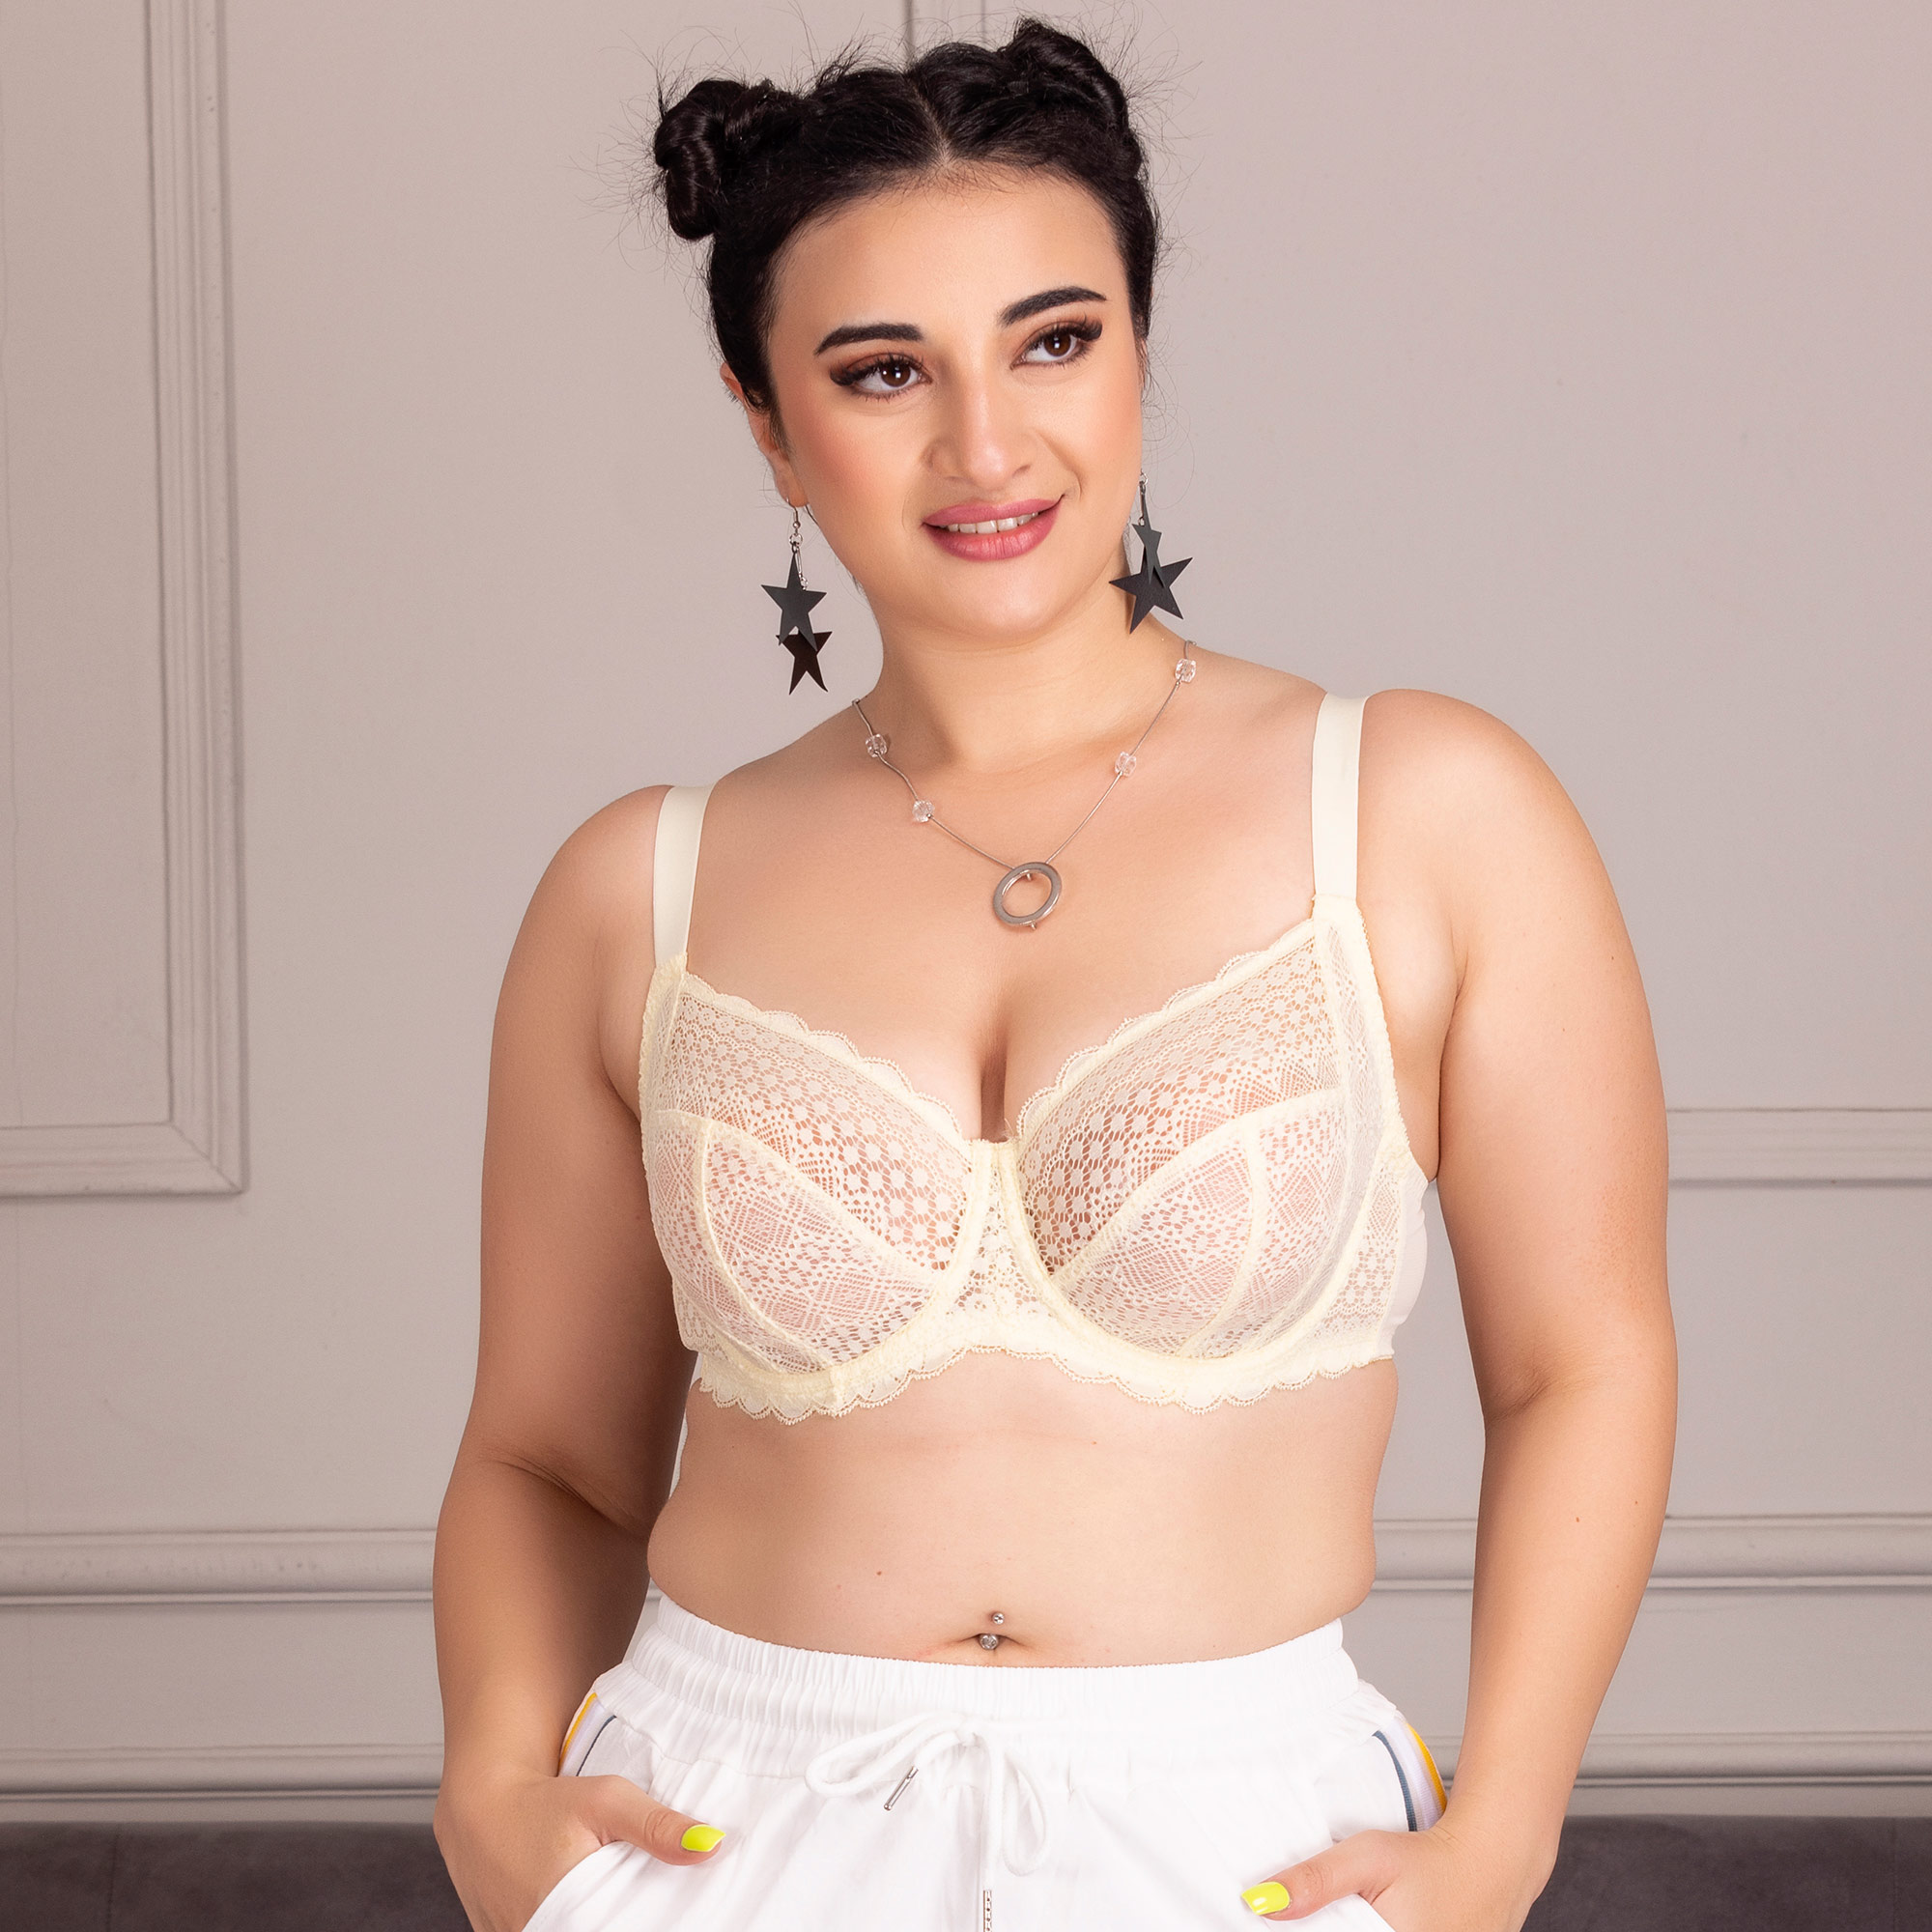 Lisca Womens 'Evelyn' Underwired Full Cup Bra - White Lace - Size